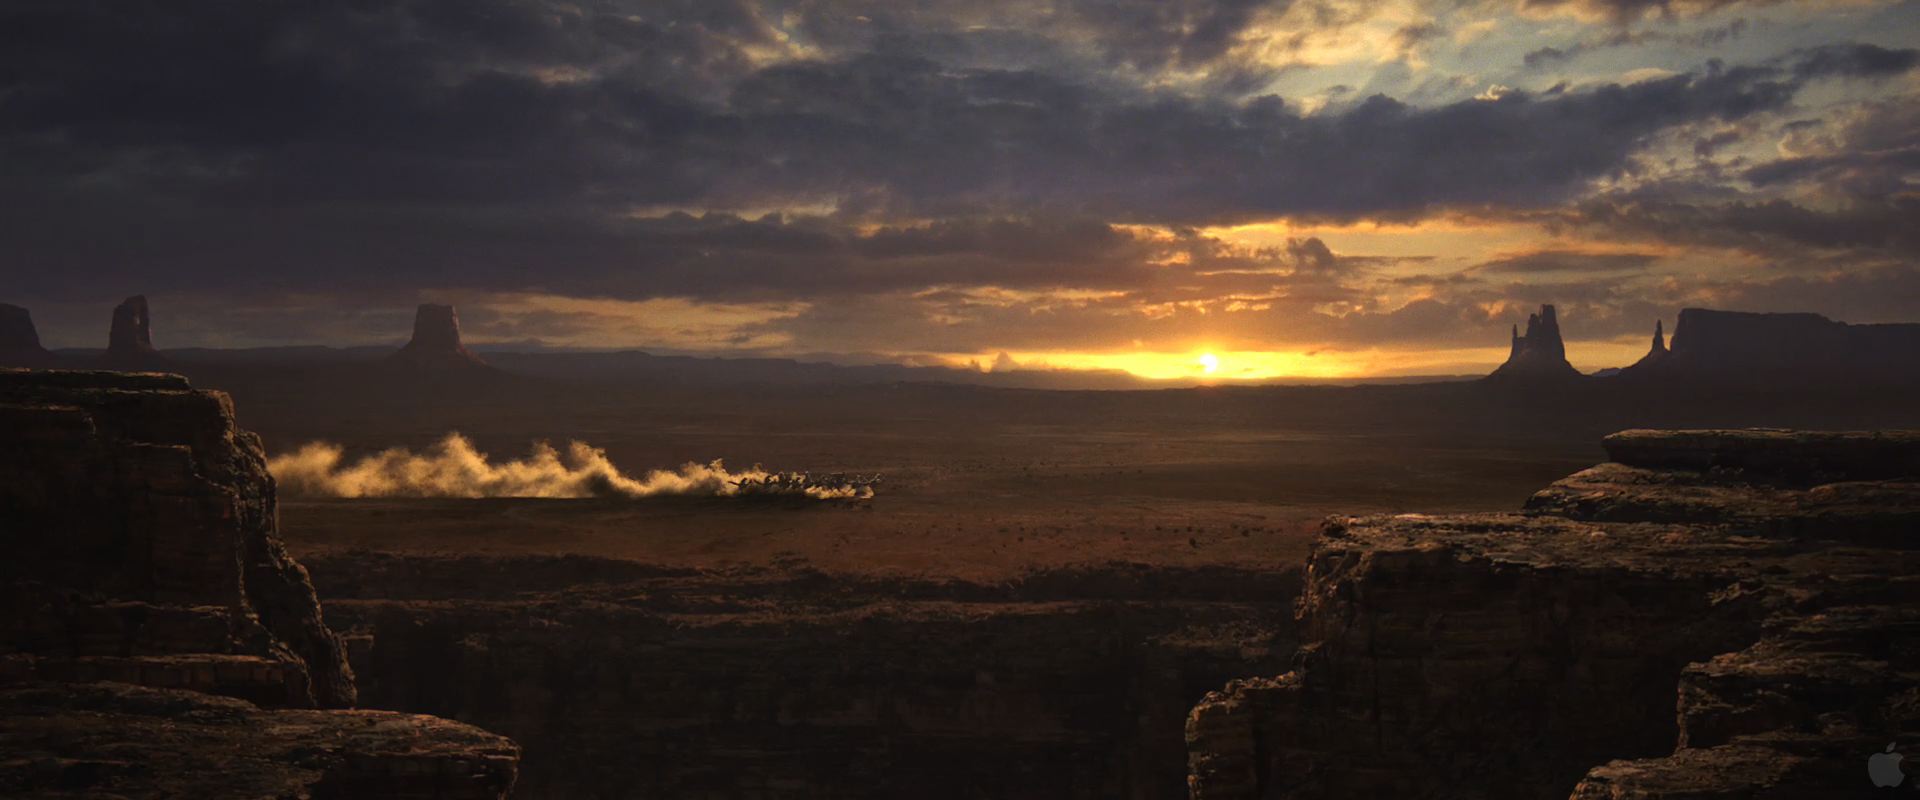  from Rango wallpaper   Click picture for high resolution HD wallpaper 1920x800